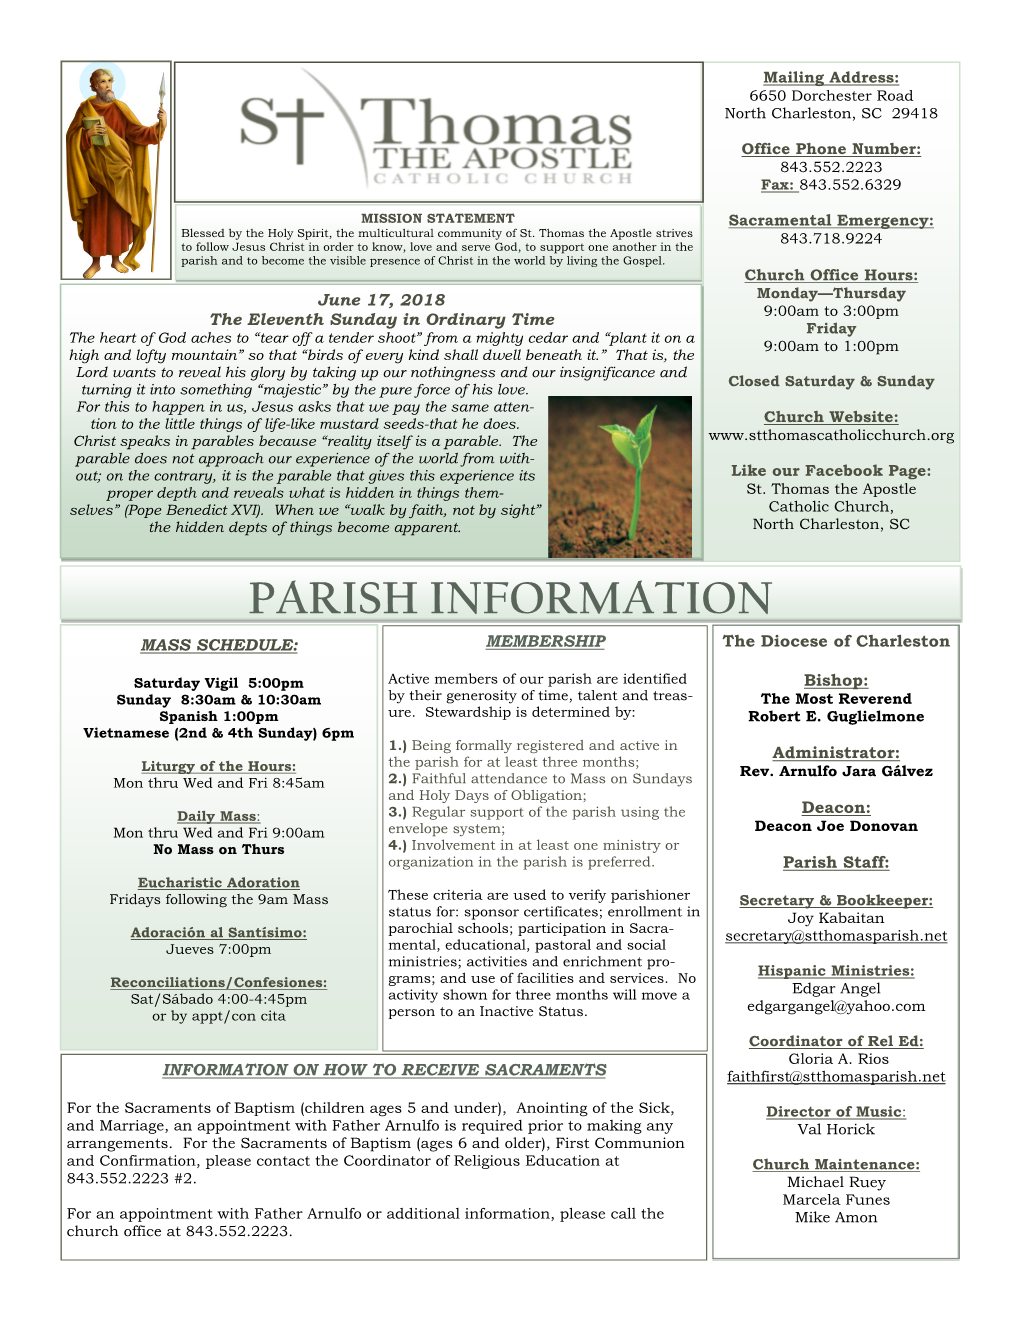 PARISH INFORMATION MASS SCHEDULE: MEMBERSHIP the Diocese of Charleston